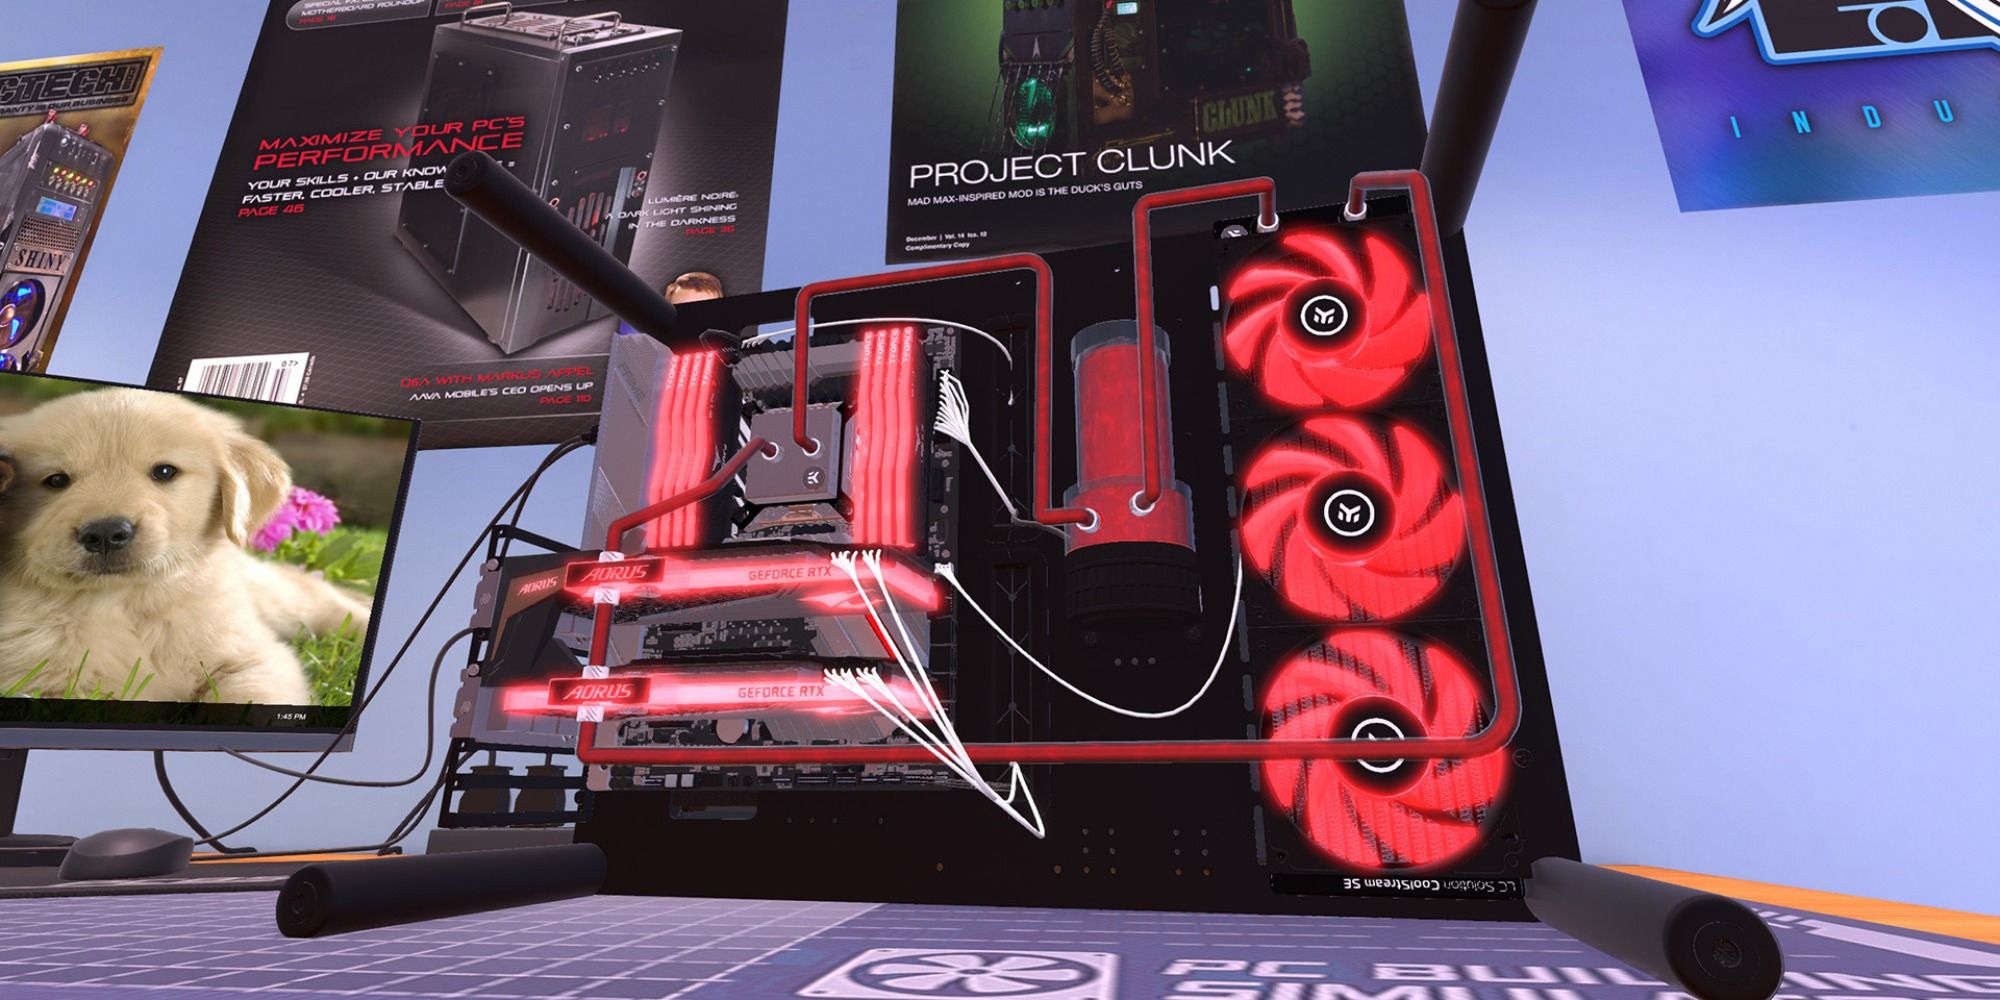 PC Building Simulator working on the inside of a pc with red components